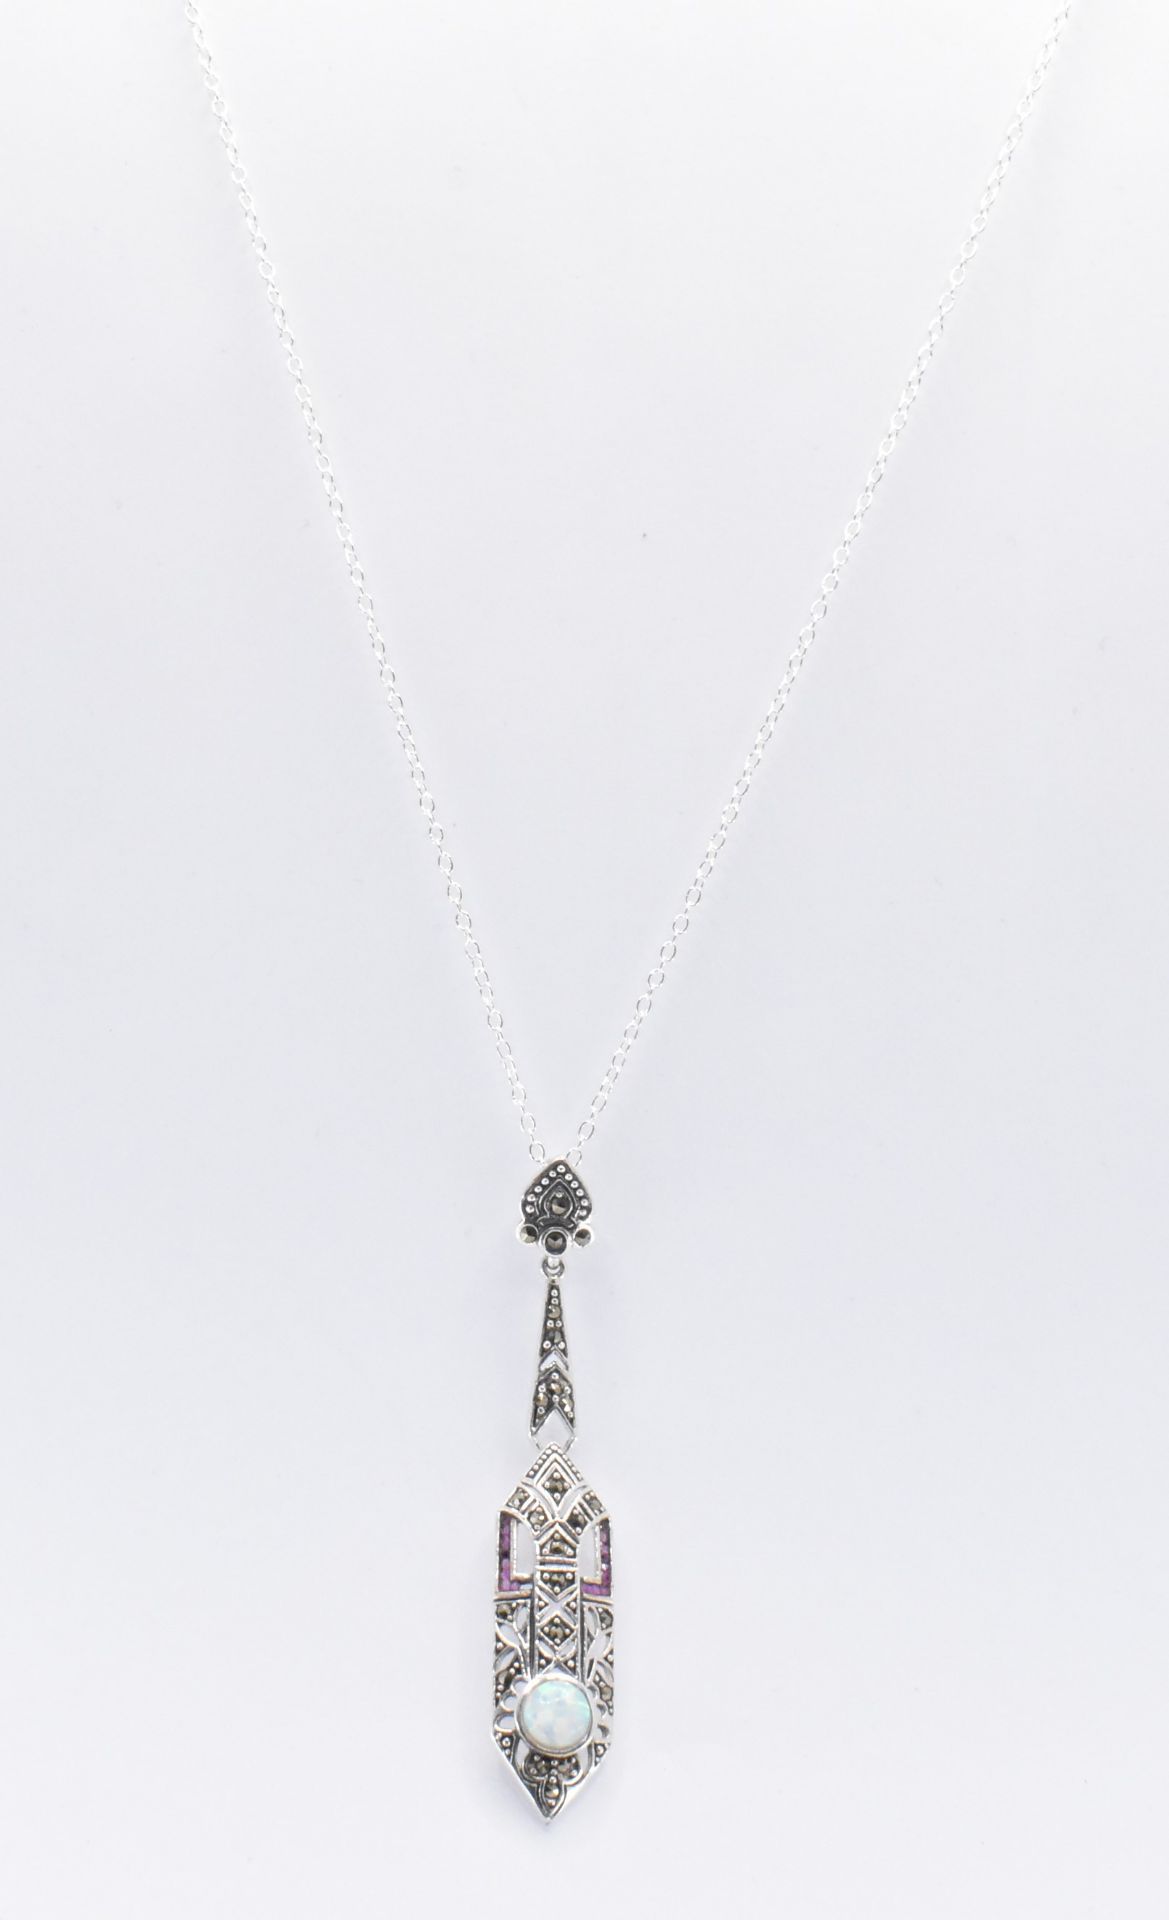 ART DECO STYLE SILVER & OPAL PENDANT NECKLACE - Image 3 of 5